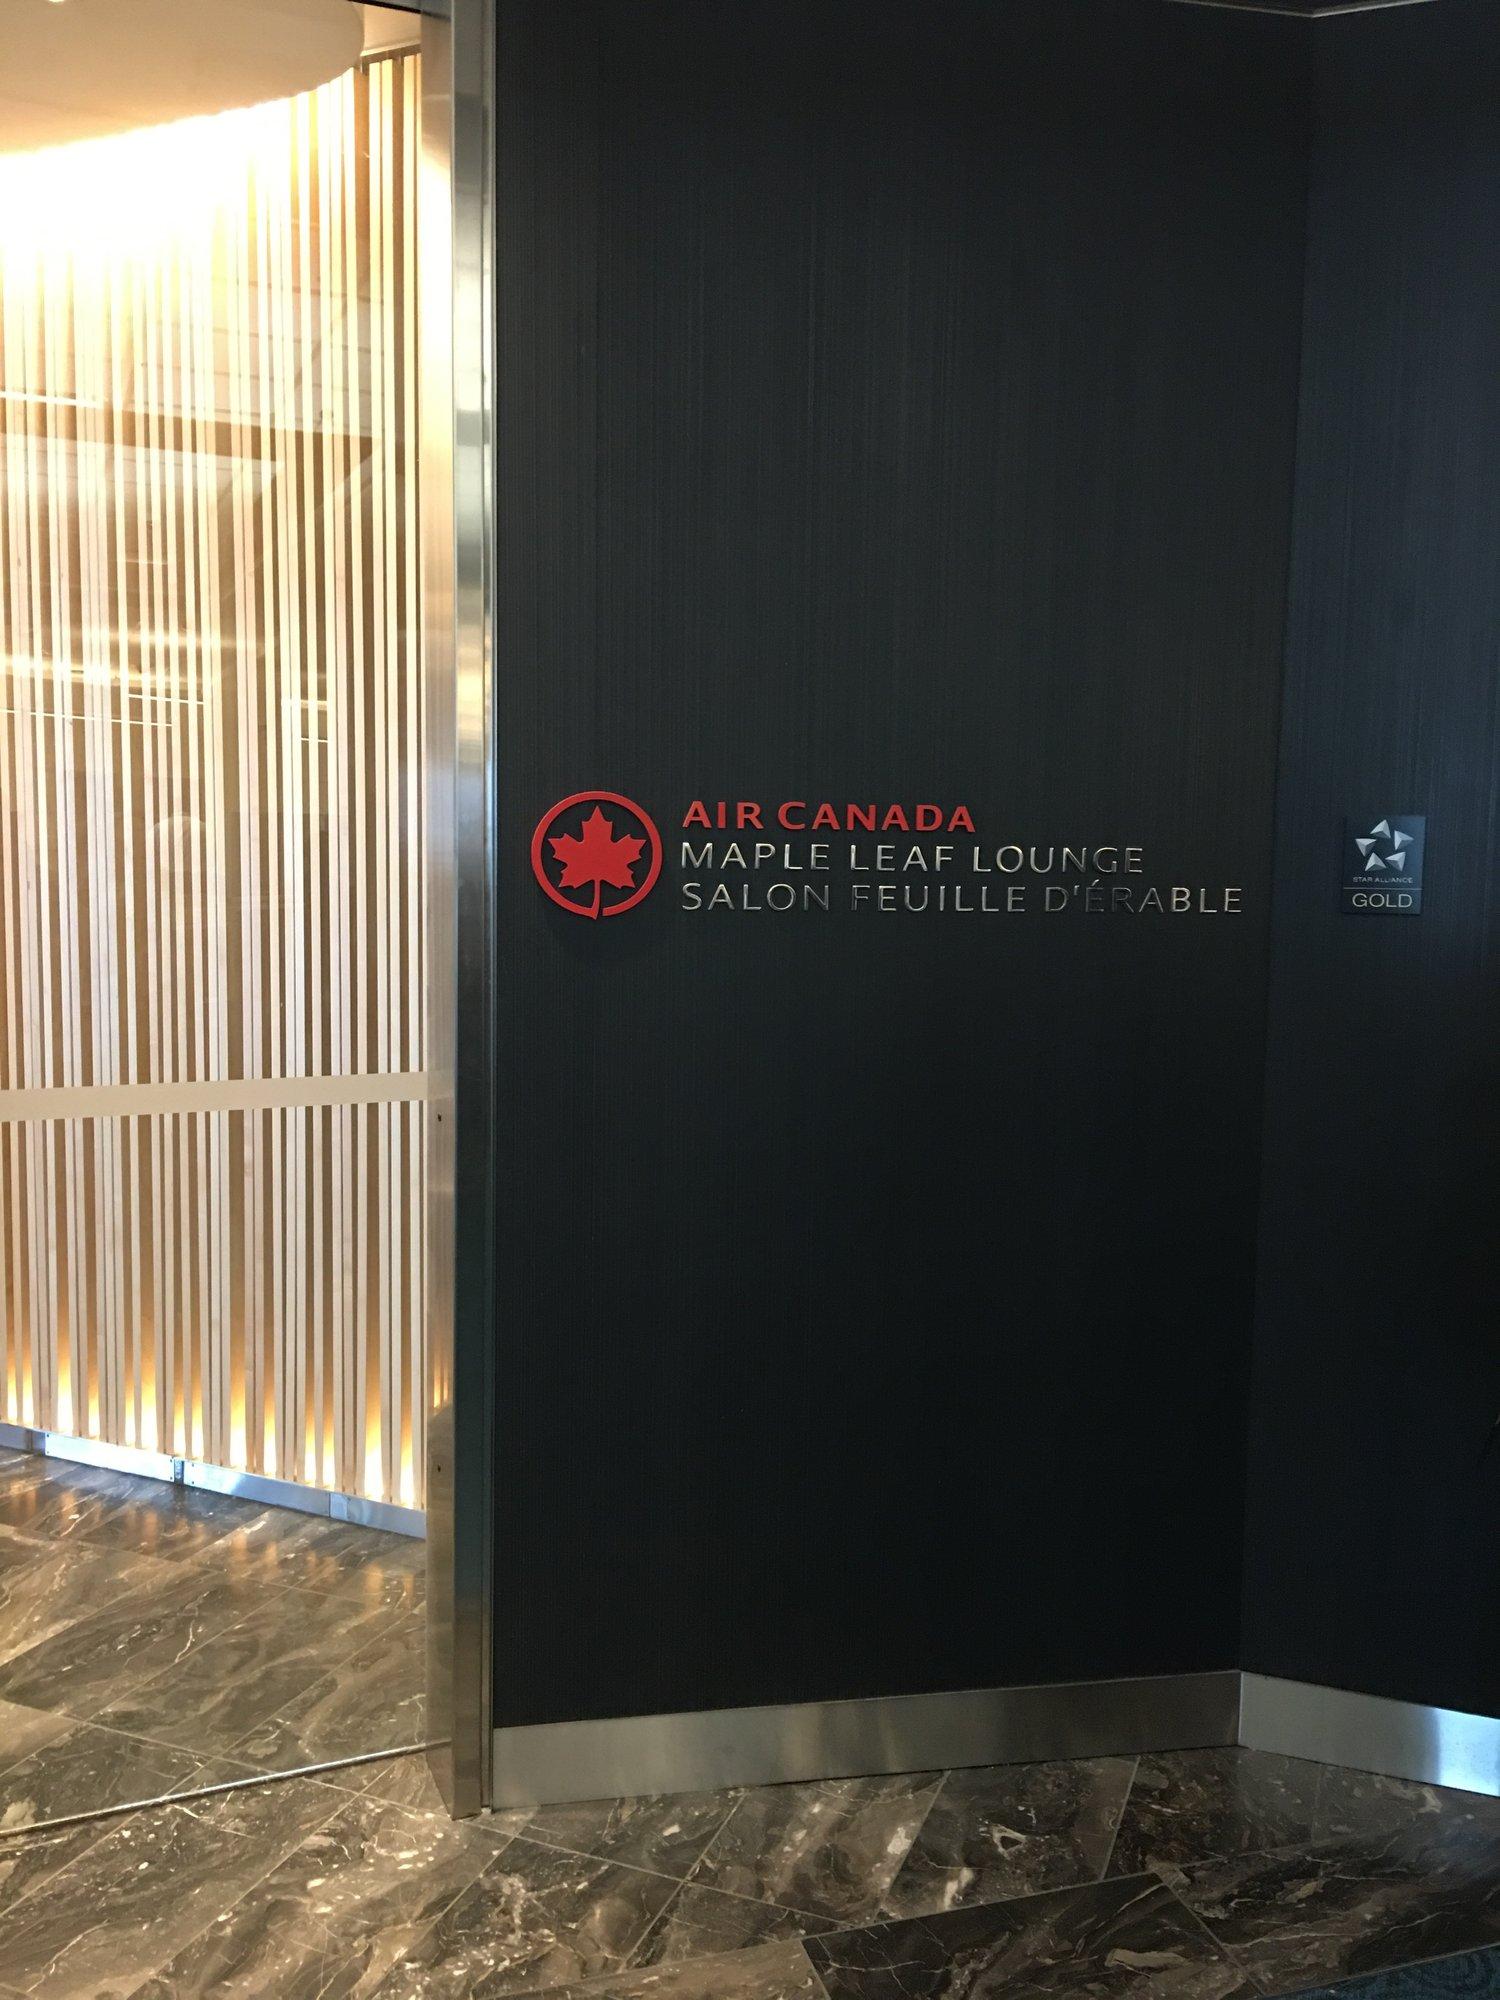 Air Canada Maple Leaf Lounge image 8 of 12